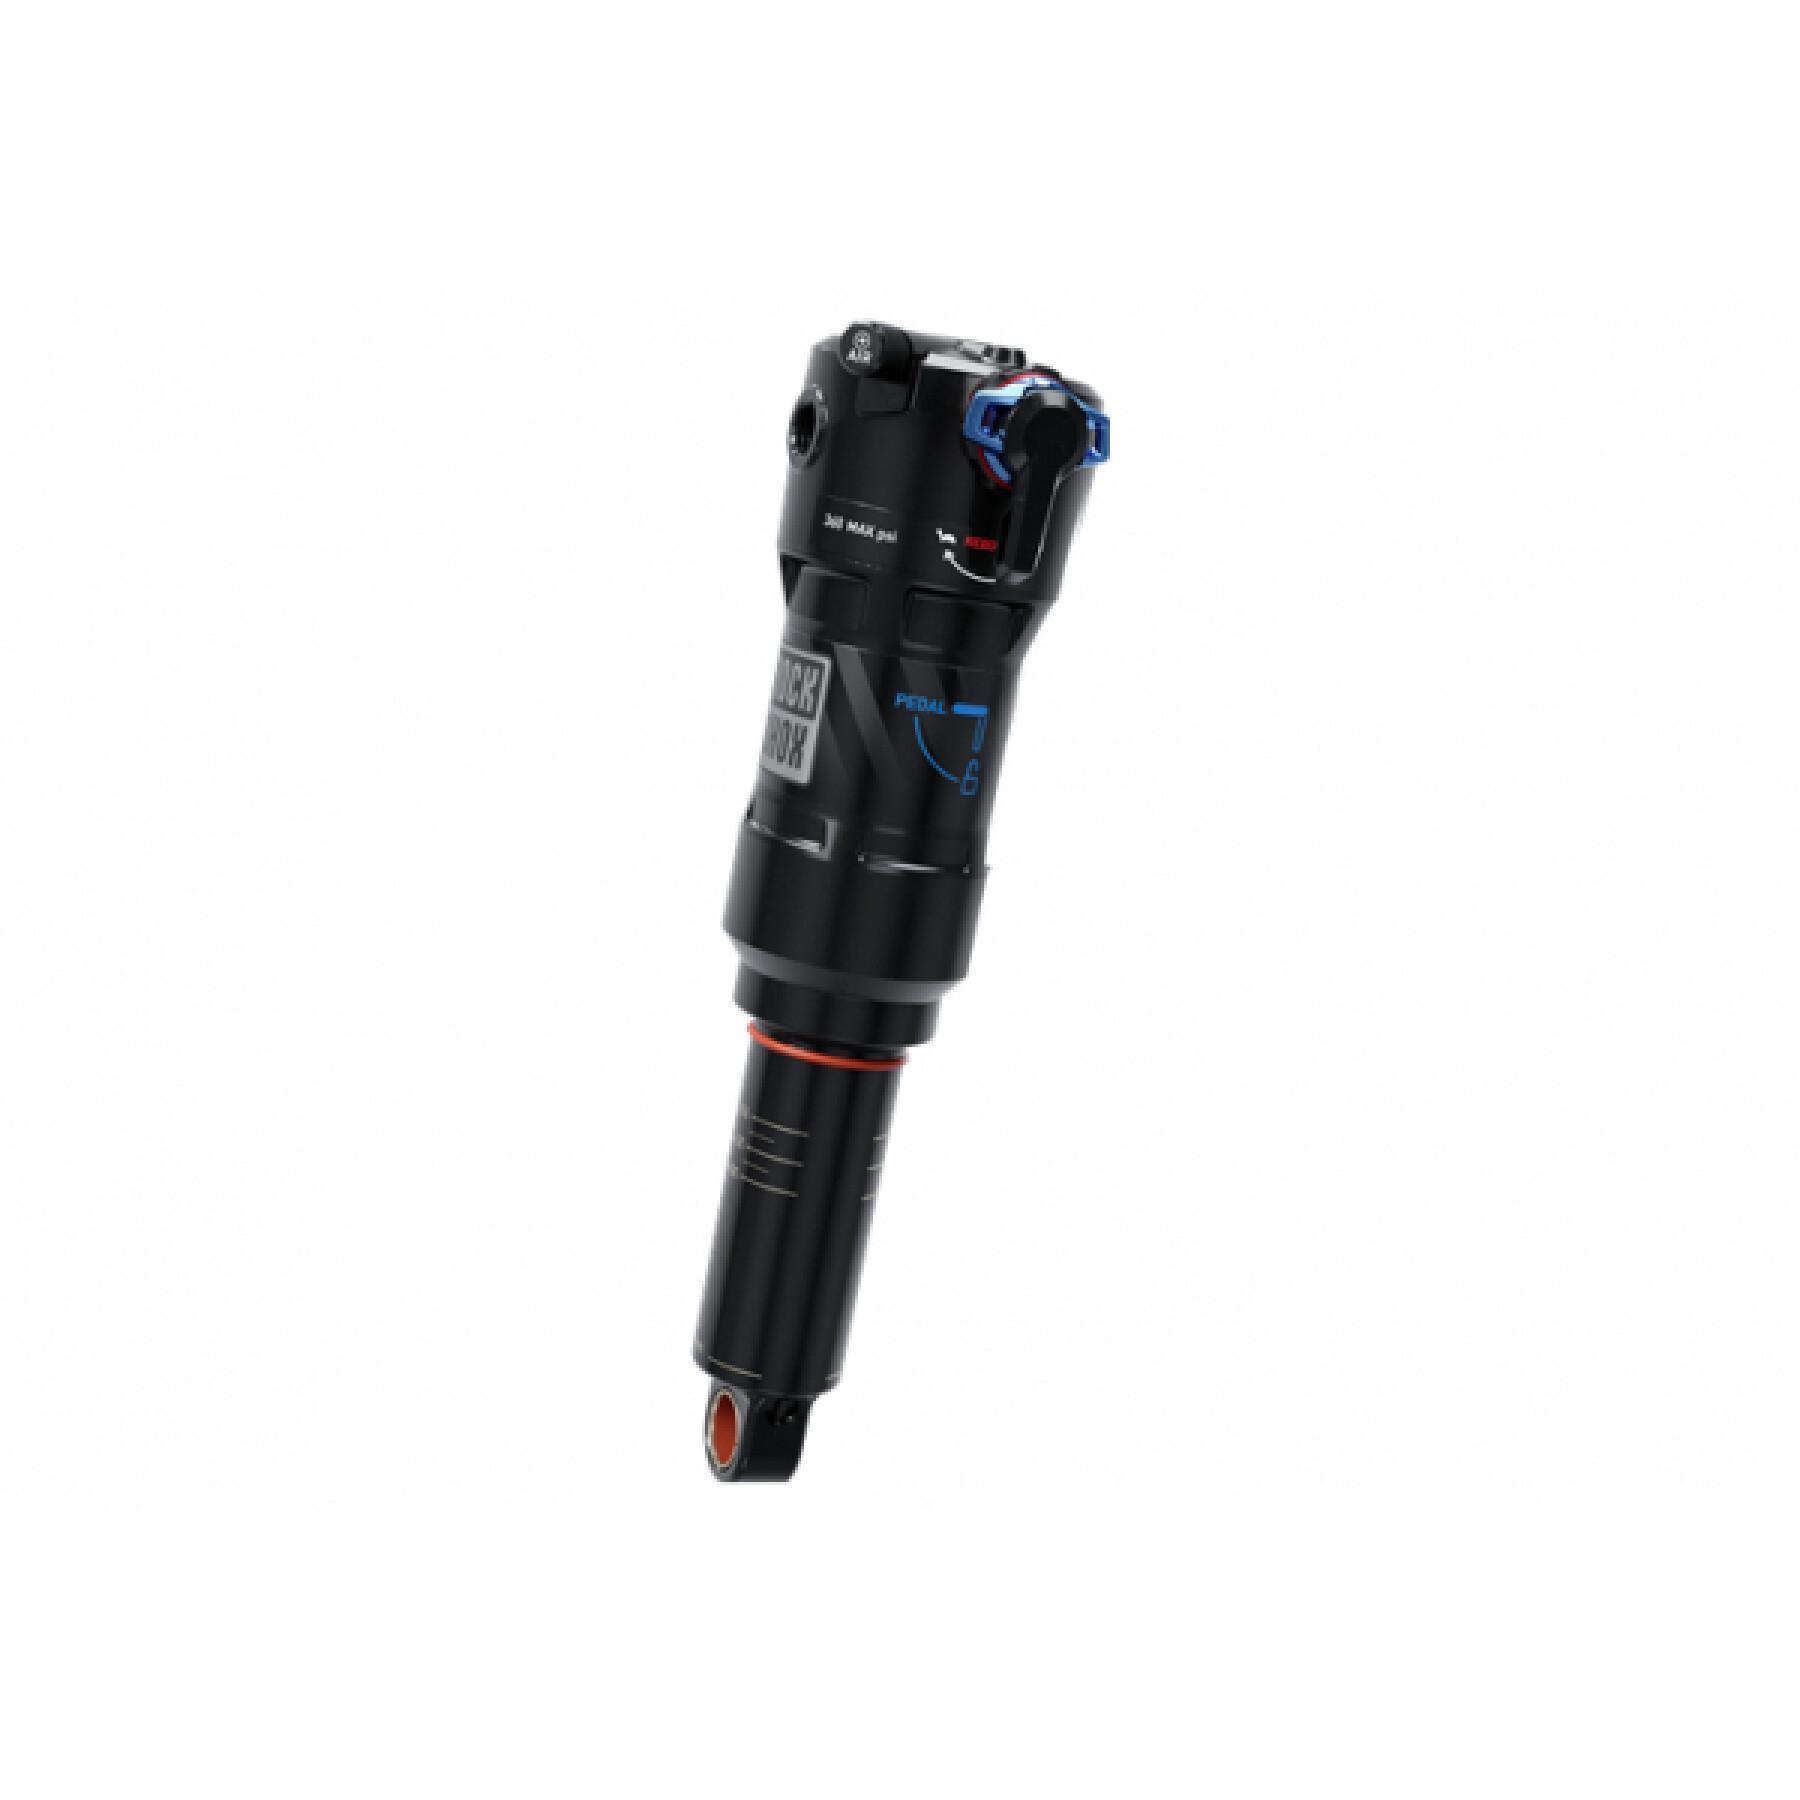 Amortecedor de choques Rockshox Deluxe Ultimate RCT Linear Air Lockout Force 190 x 42.5 mm